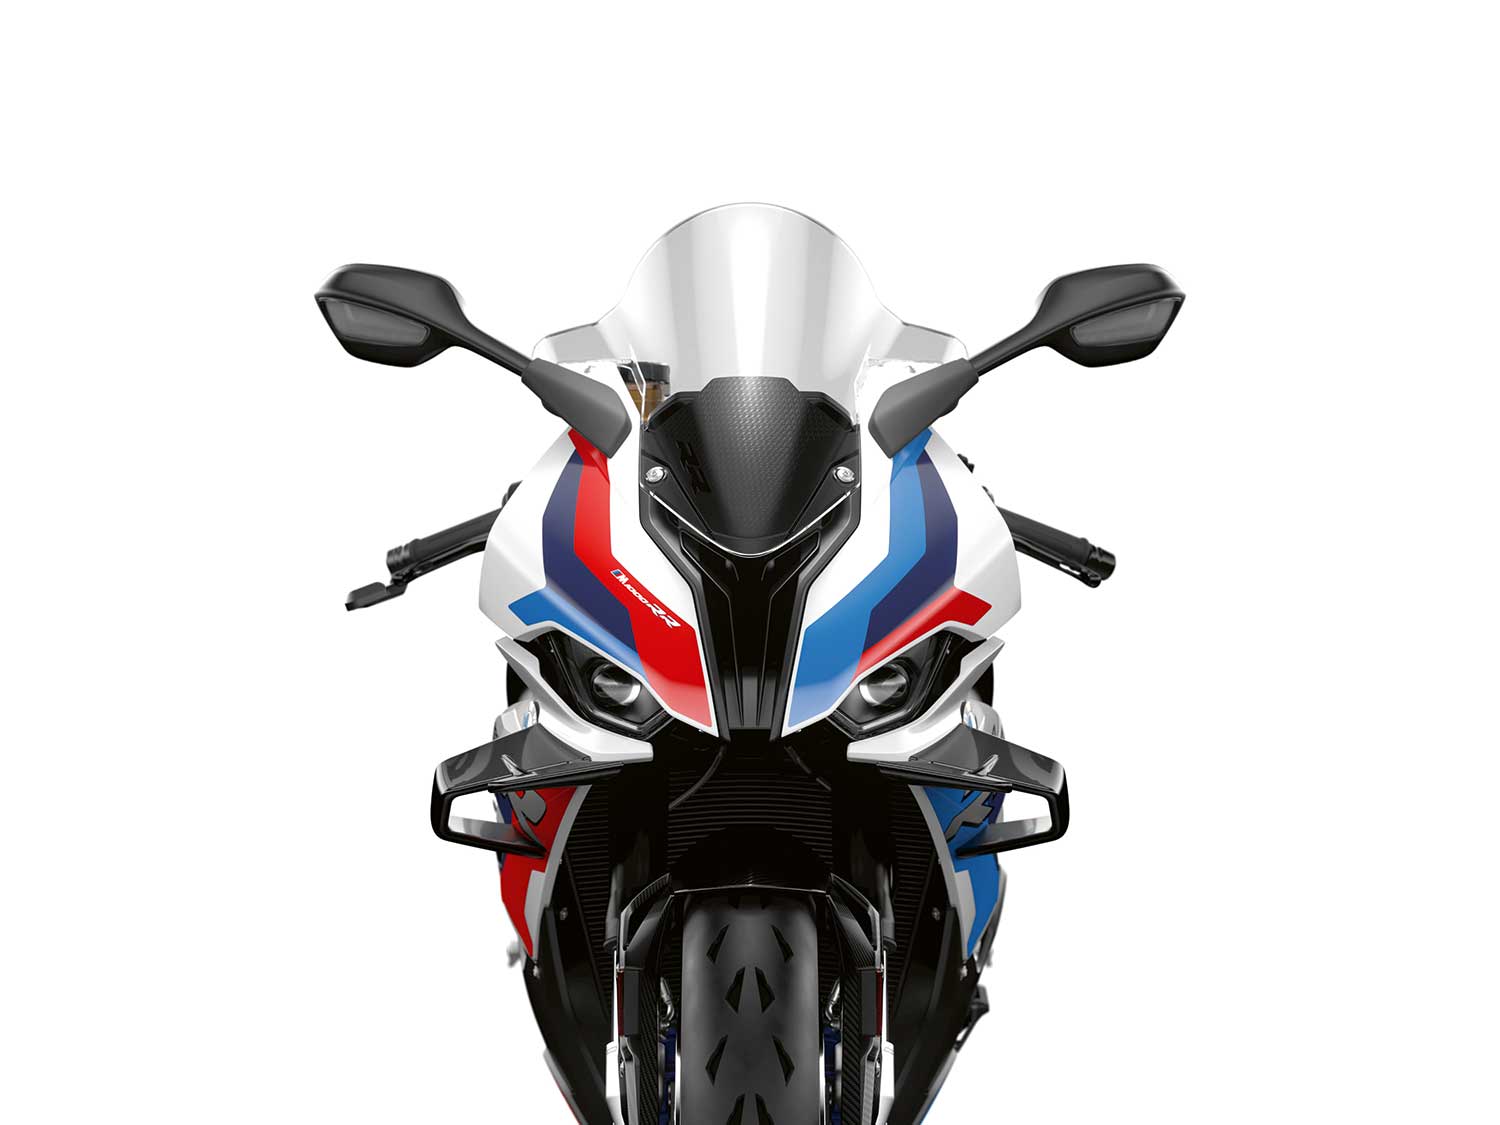 BMW M 1000 RR First Look Preview